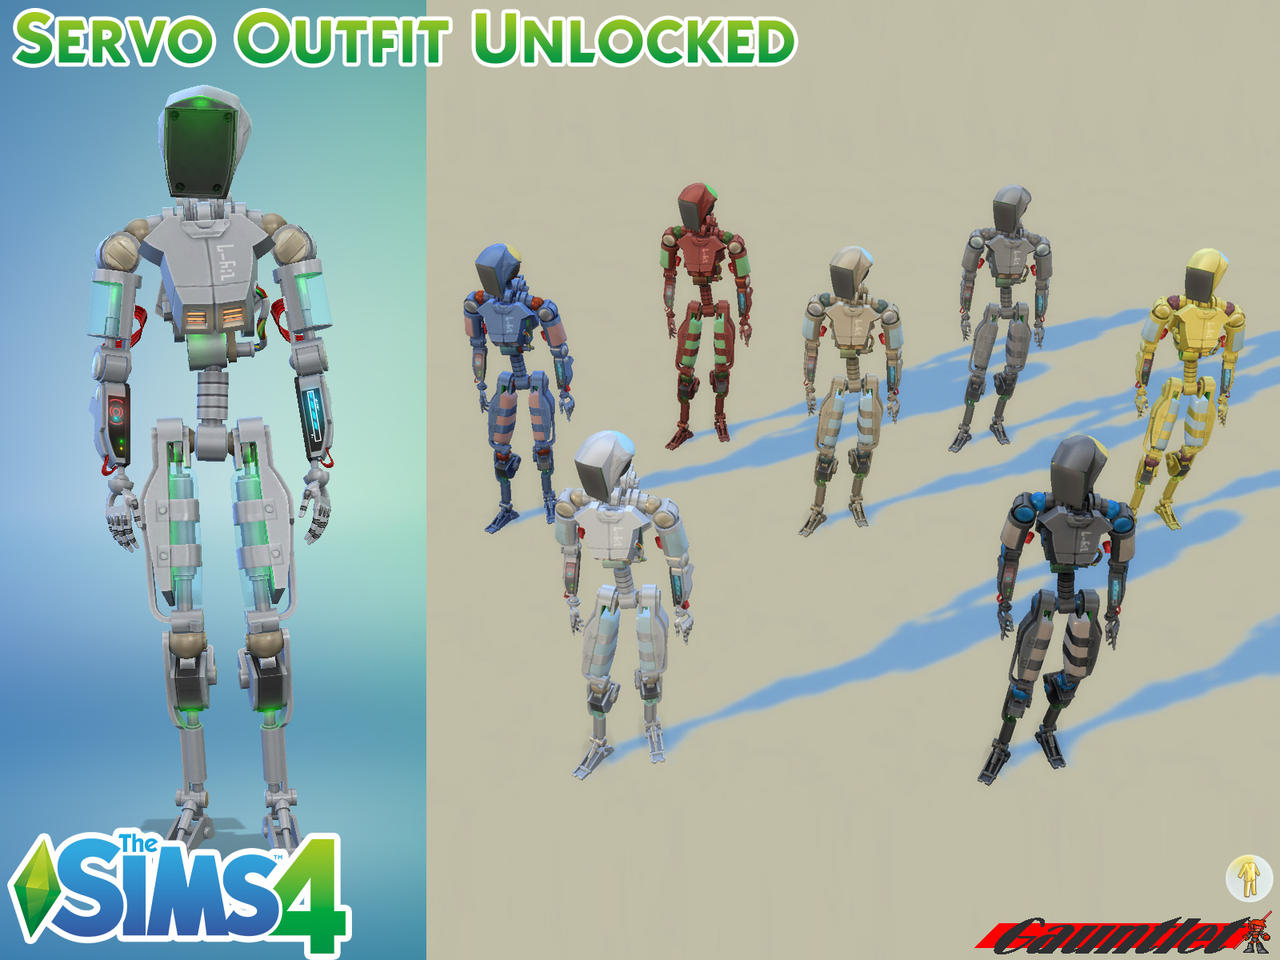 Sims4 Servo Outfit Unlocked